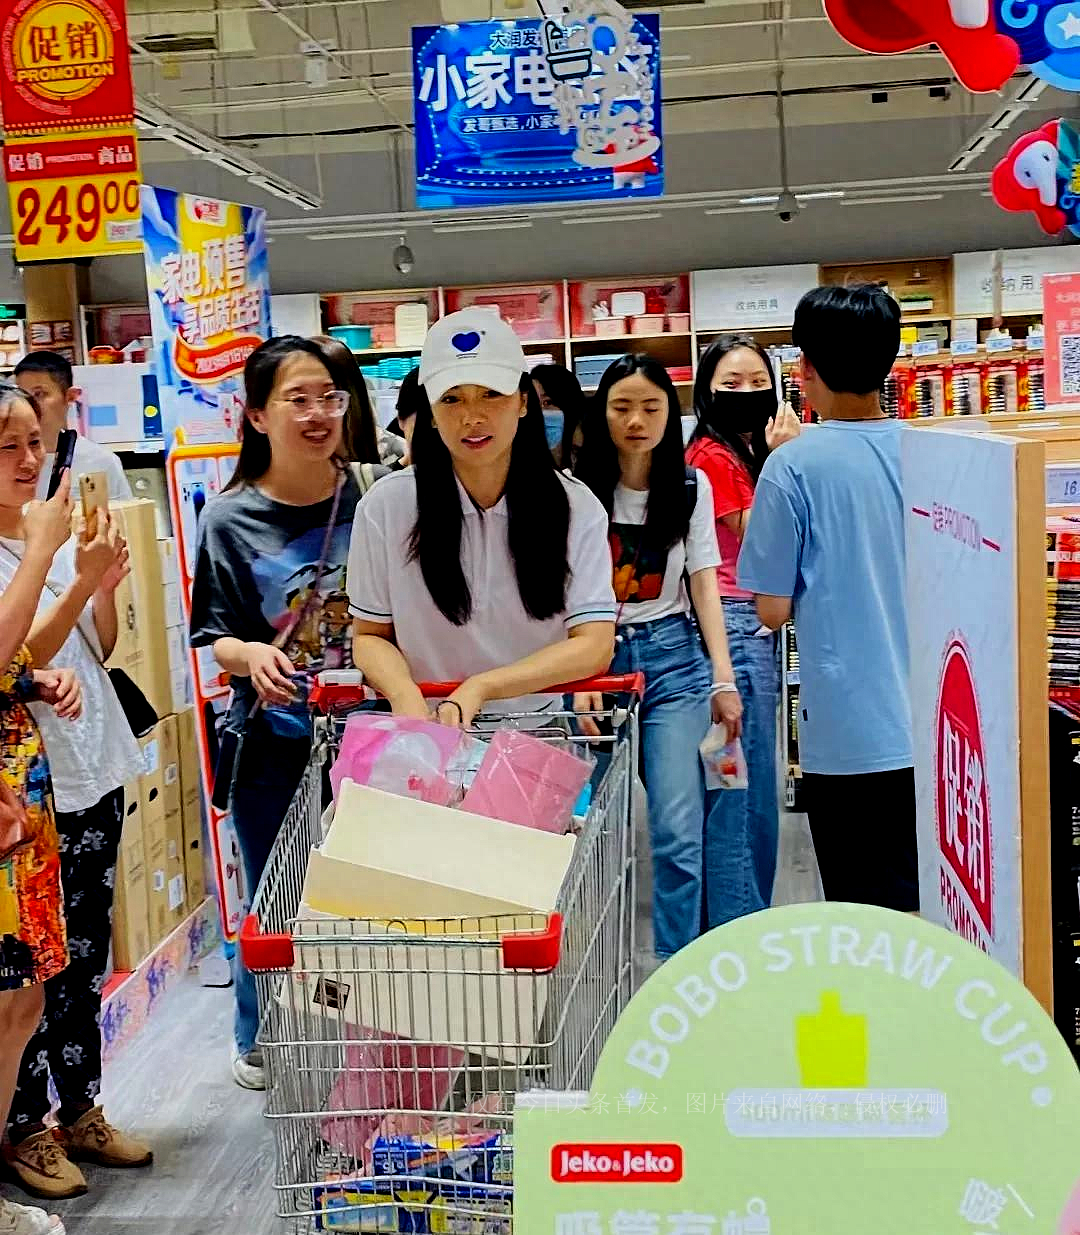 Liu Tao Went To The Supermarket And Was